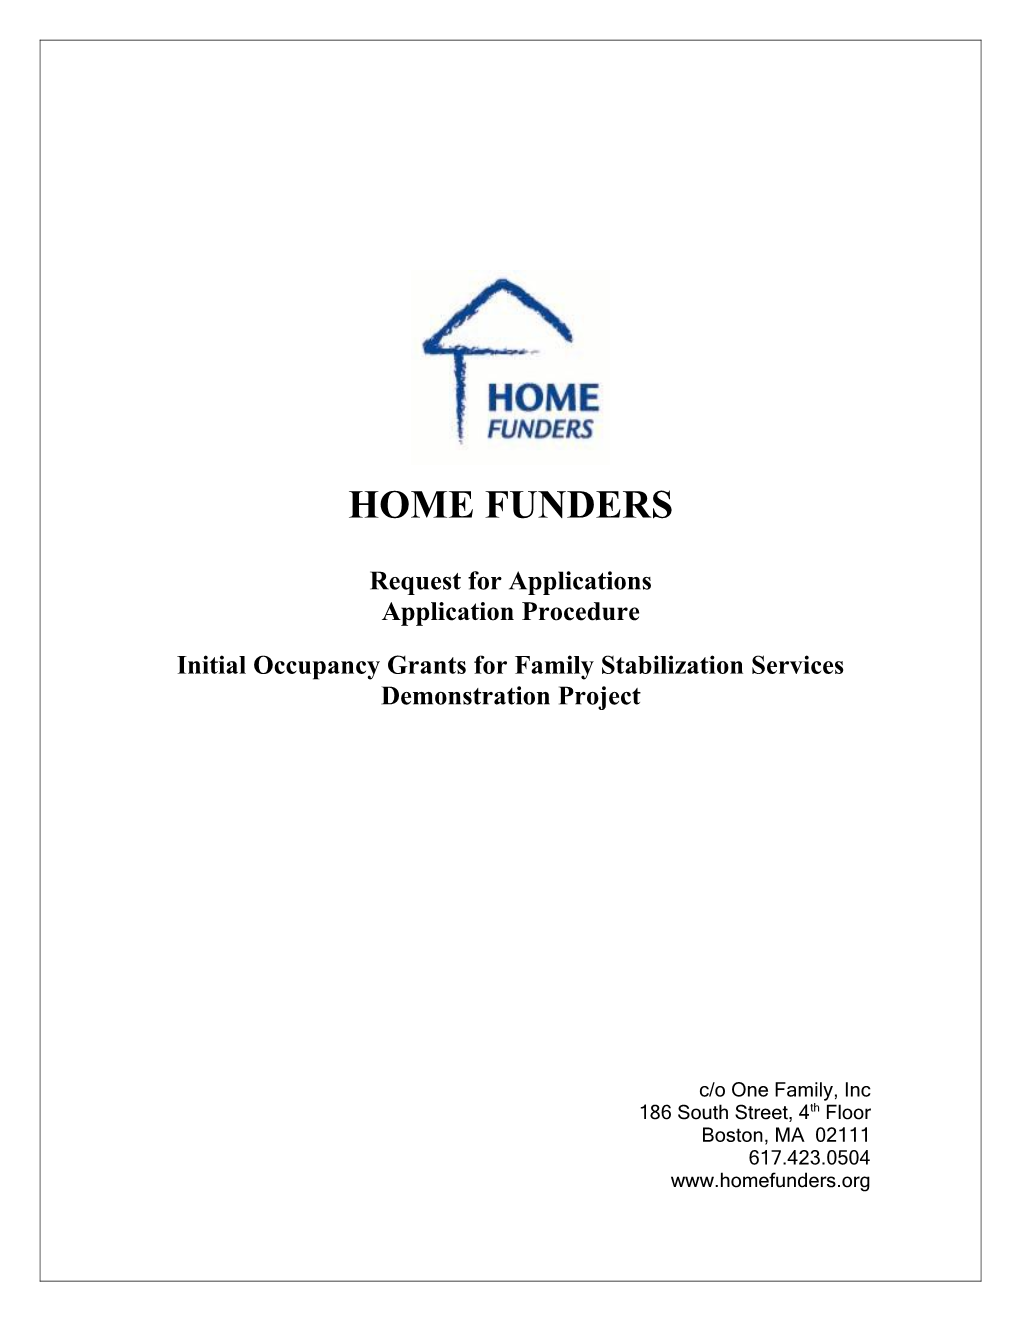 Initial Occupancy Grants for Family Stabilization Services